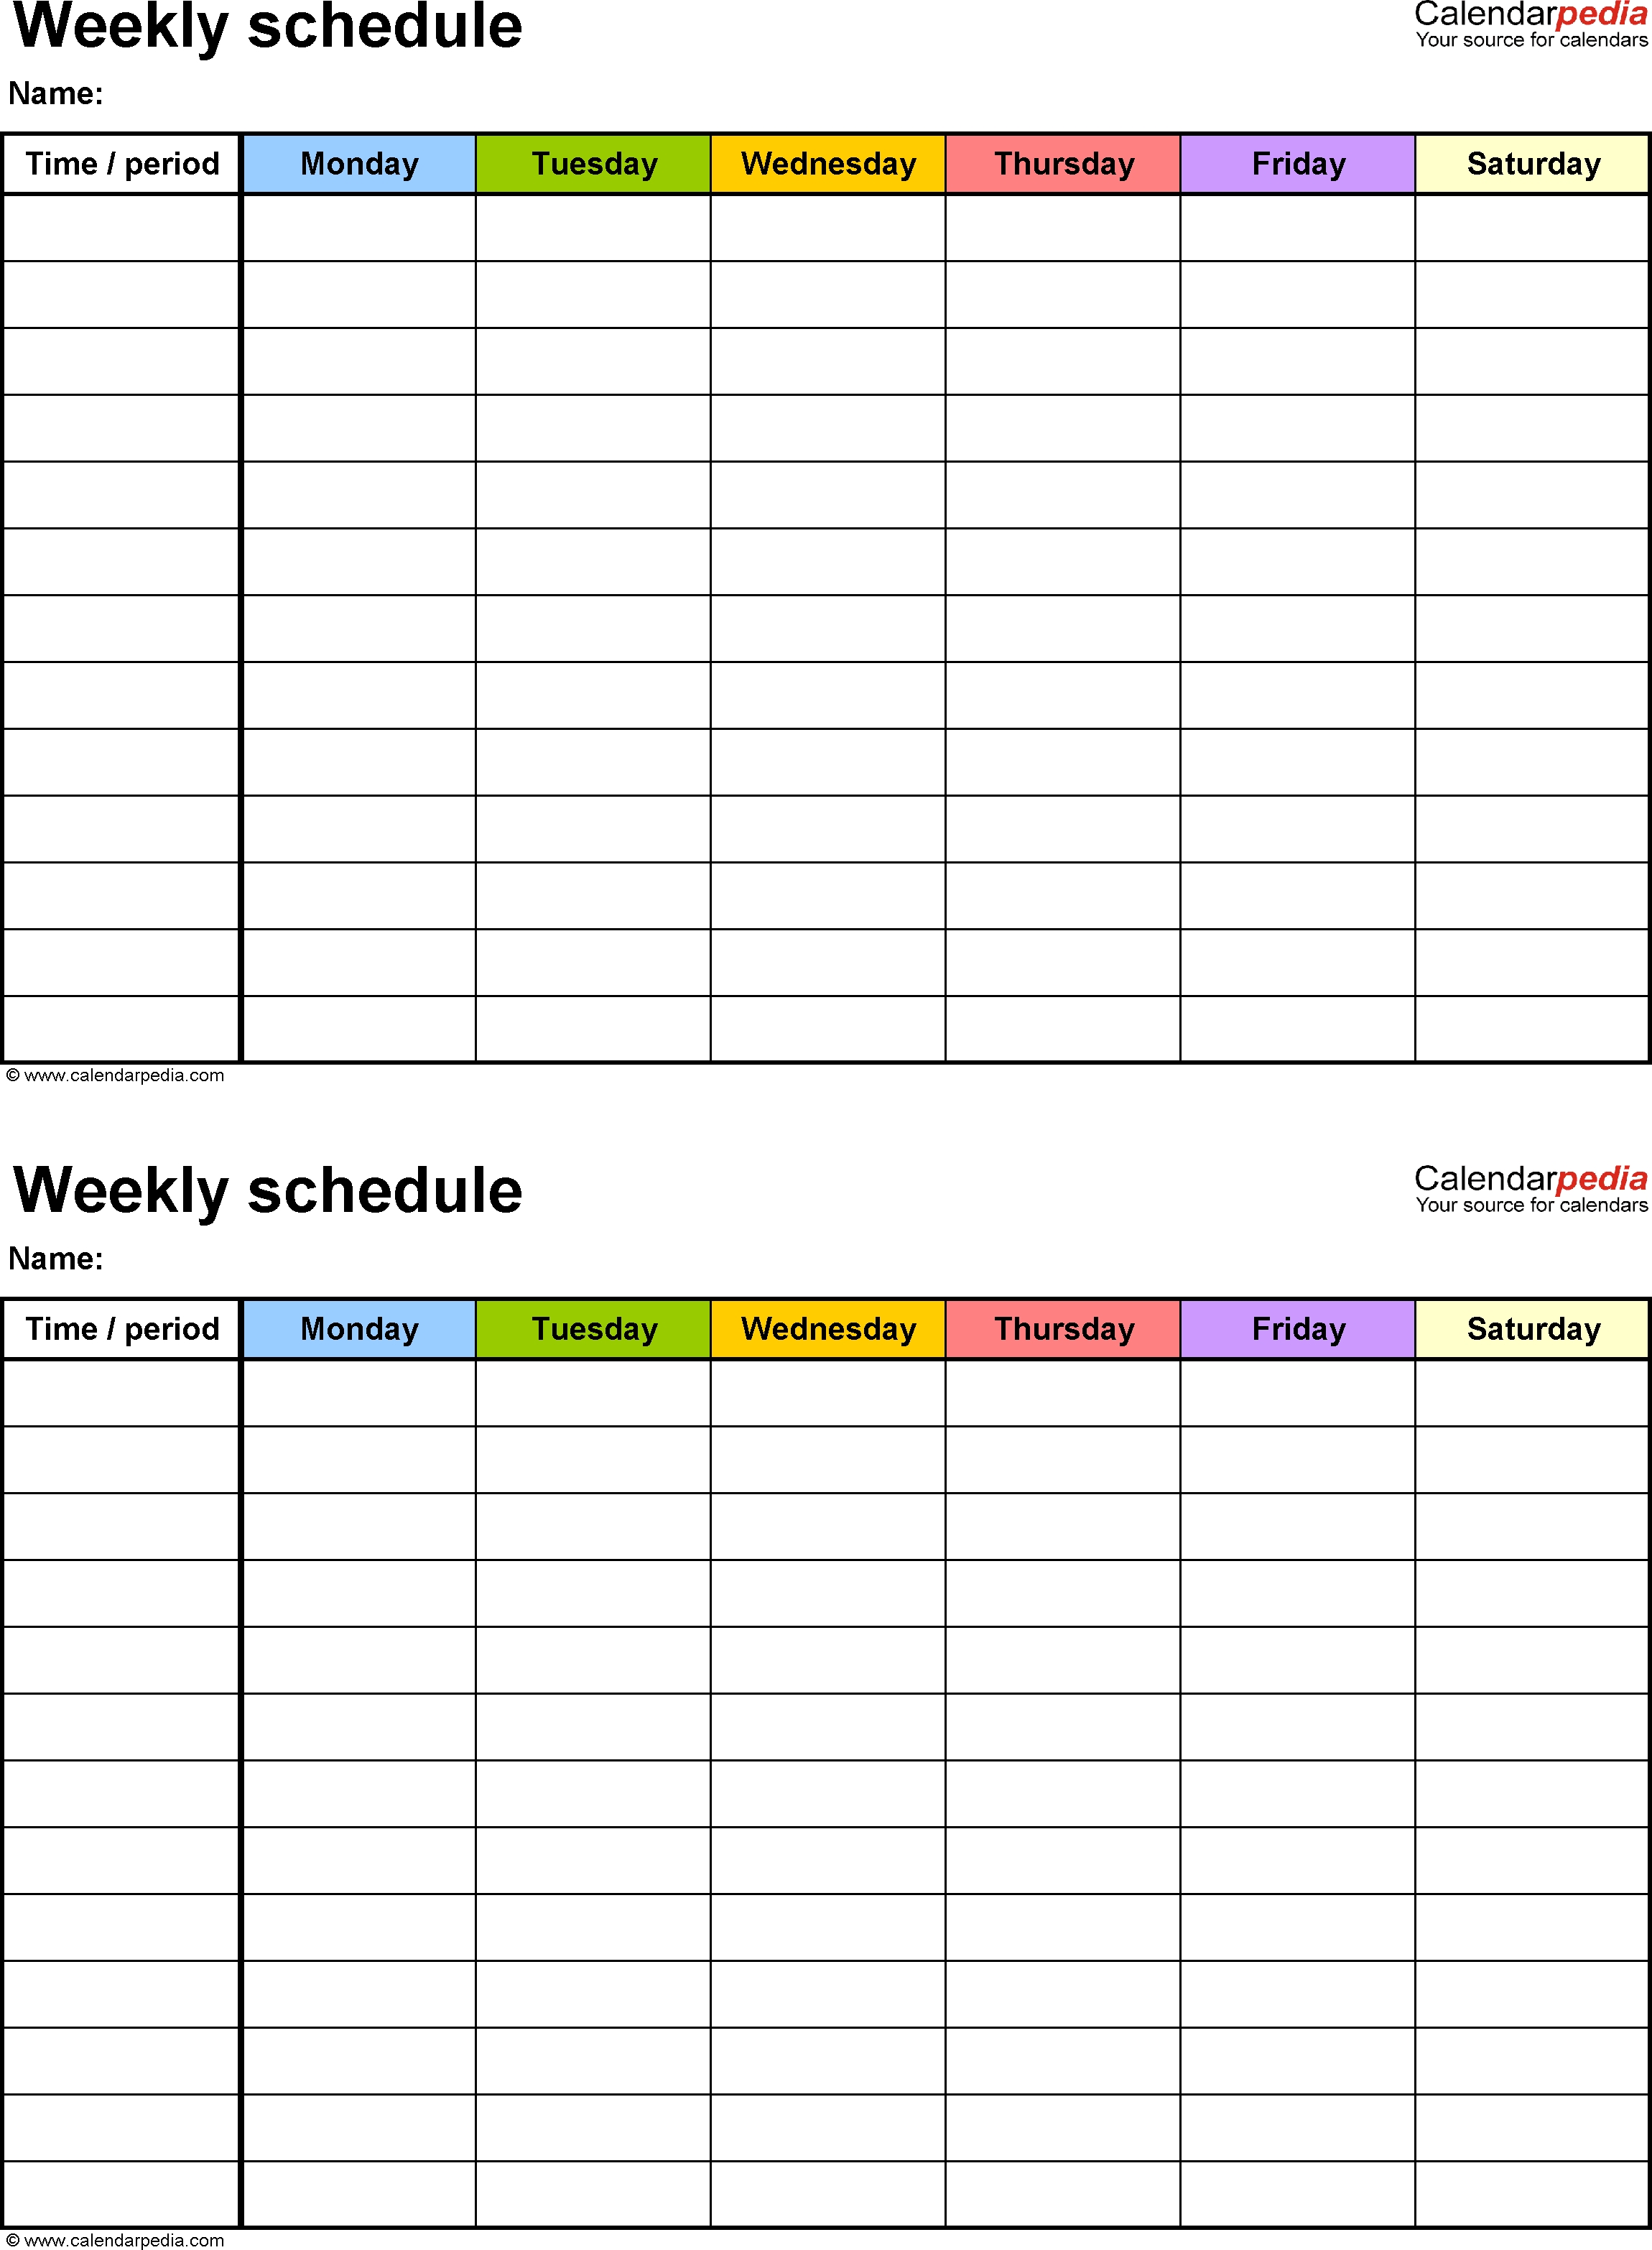 Free Weekly Schedule Templates For Excel - 18 Templates with Images Of Days Of The Week Calendar For One Month